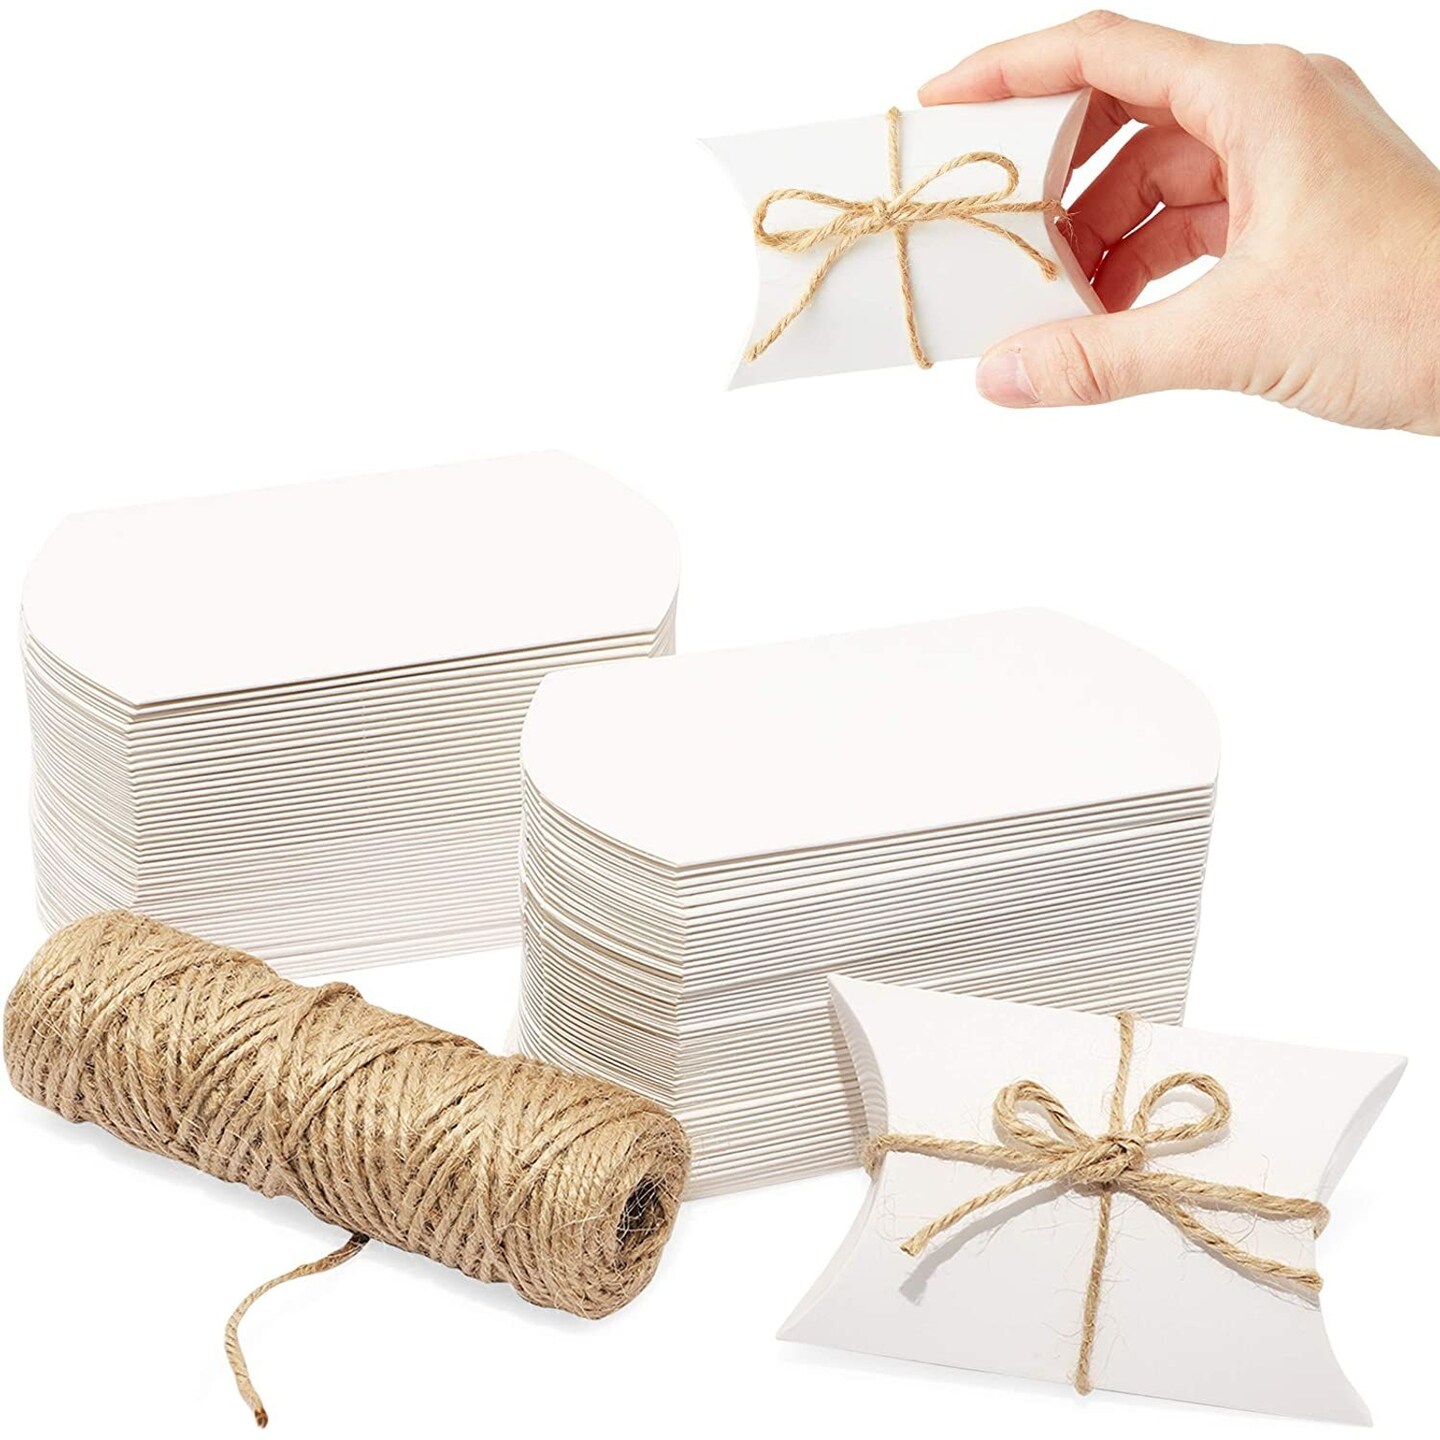 Mini Paper Pillow Gift Box Set with Jute Twine (3.5 x 2.5 x 0.95 In, 100 Pack)